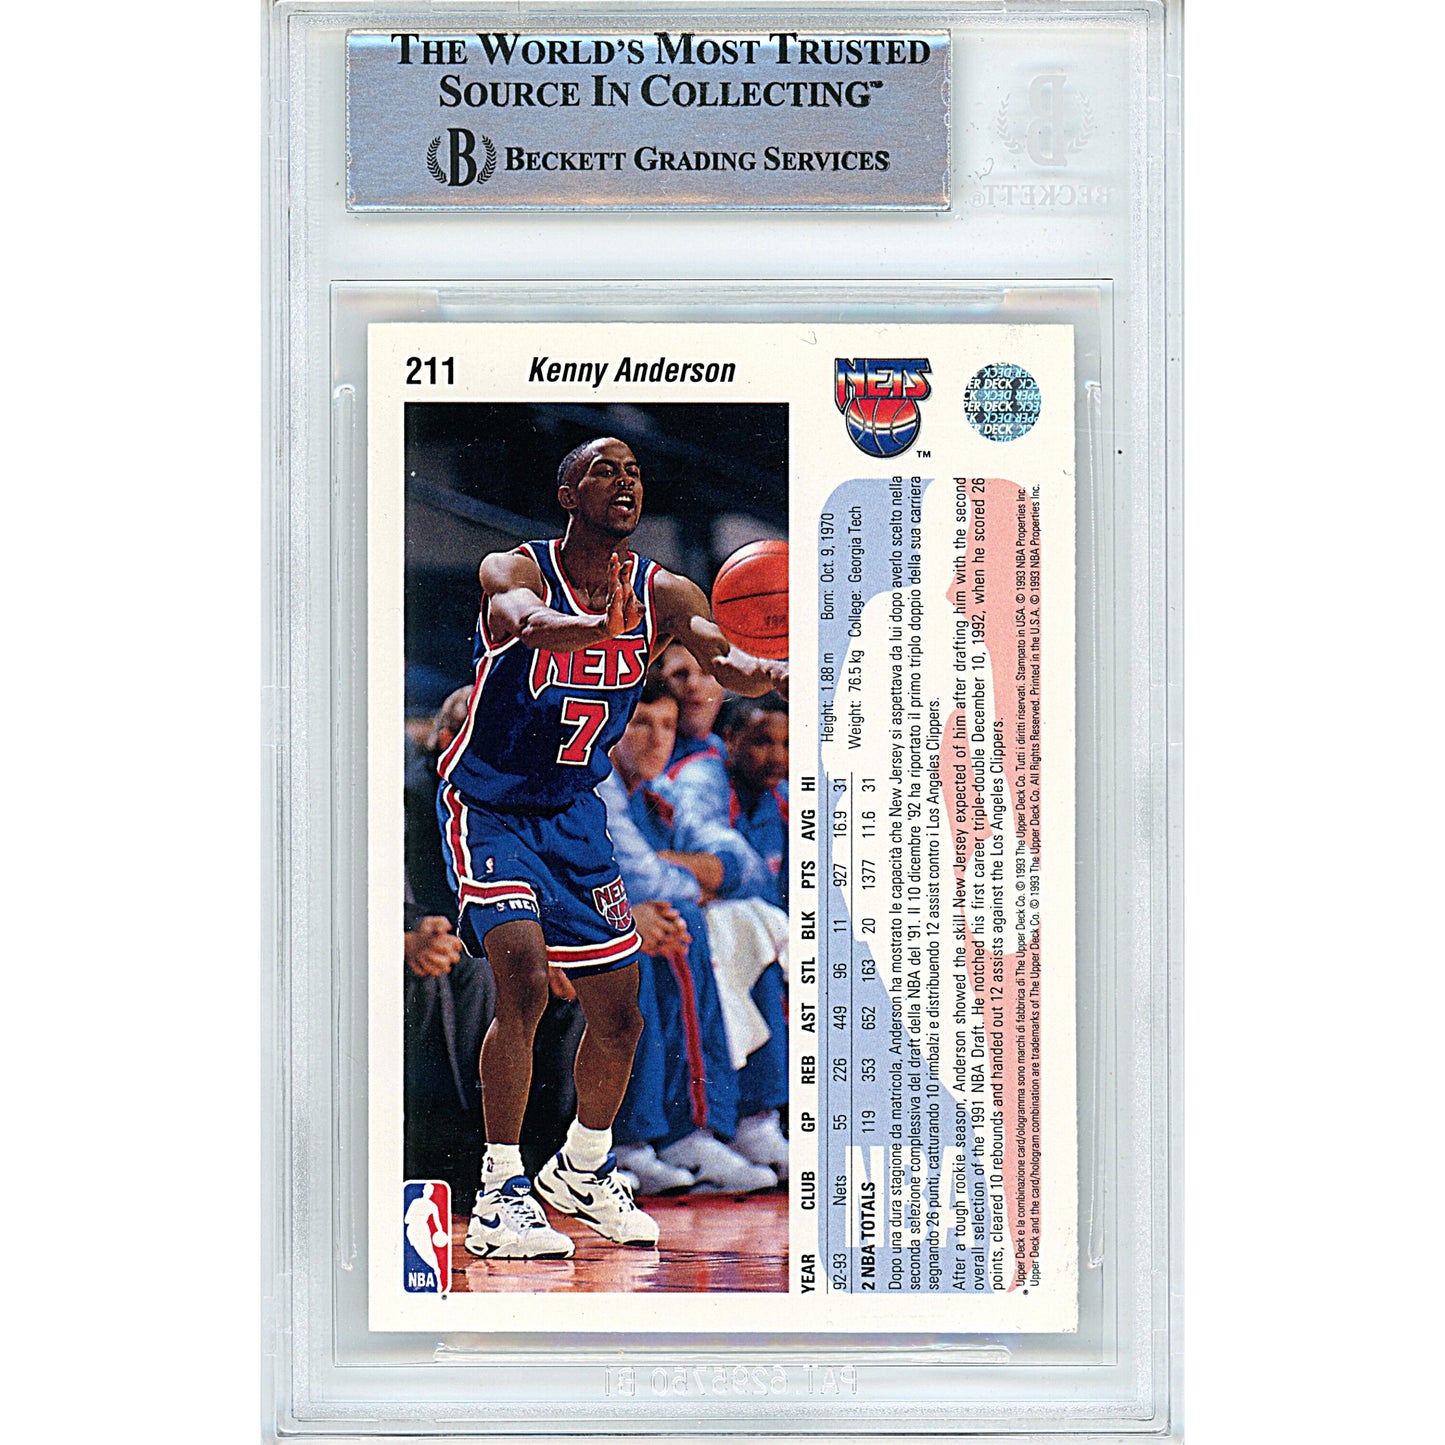 Basketballs- Autographed- Kenny Anderson Signed New Jersey Nets 1992-1993 Upper Deck International Italian Edition Basketball Card Beckett Authentication Slabbed 00014998757 - 102